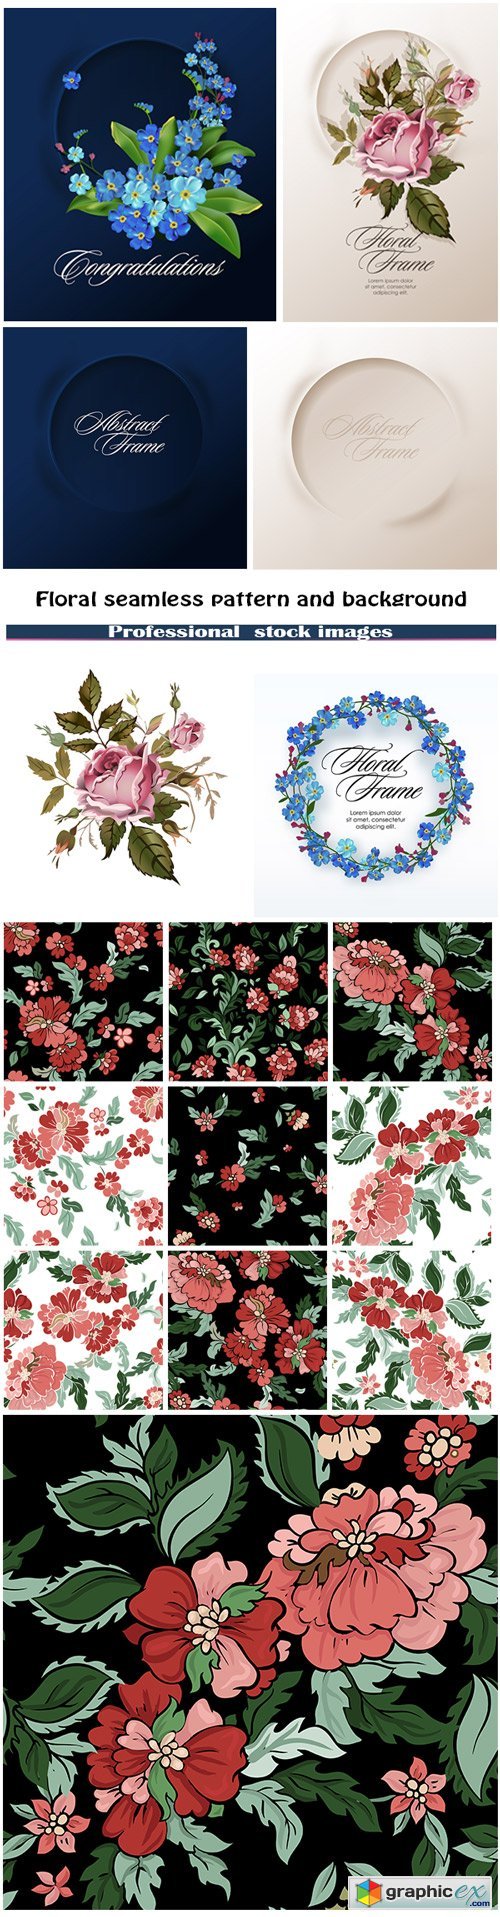 Floral seamless pattern and background